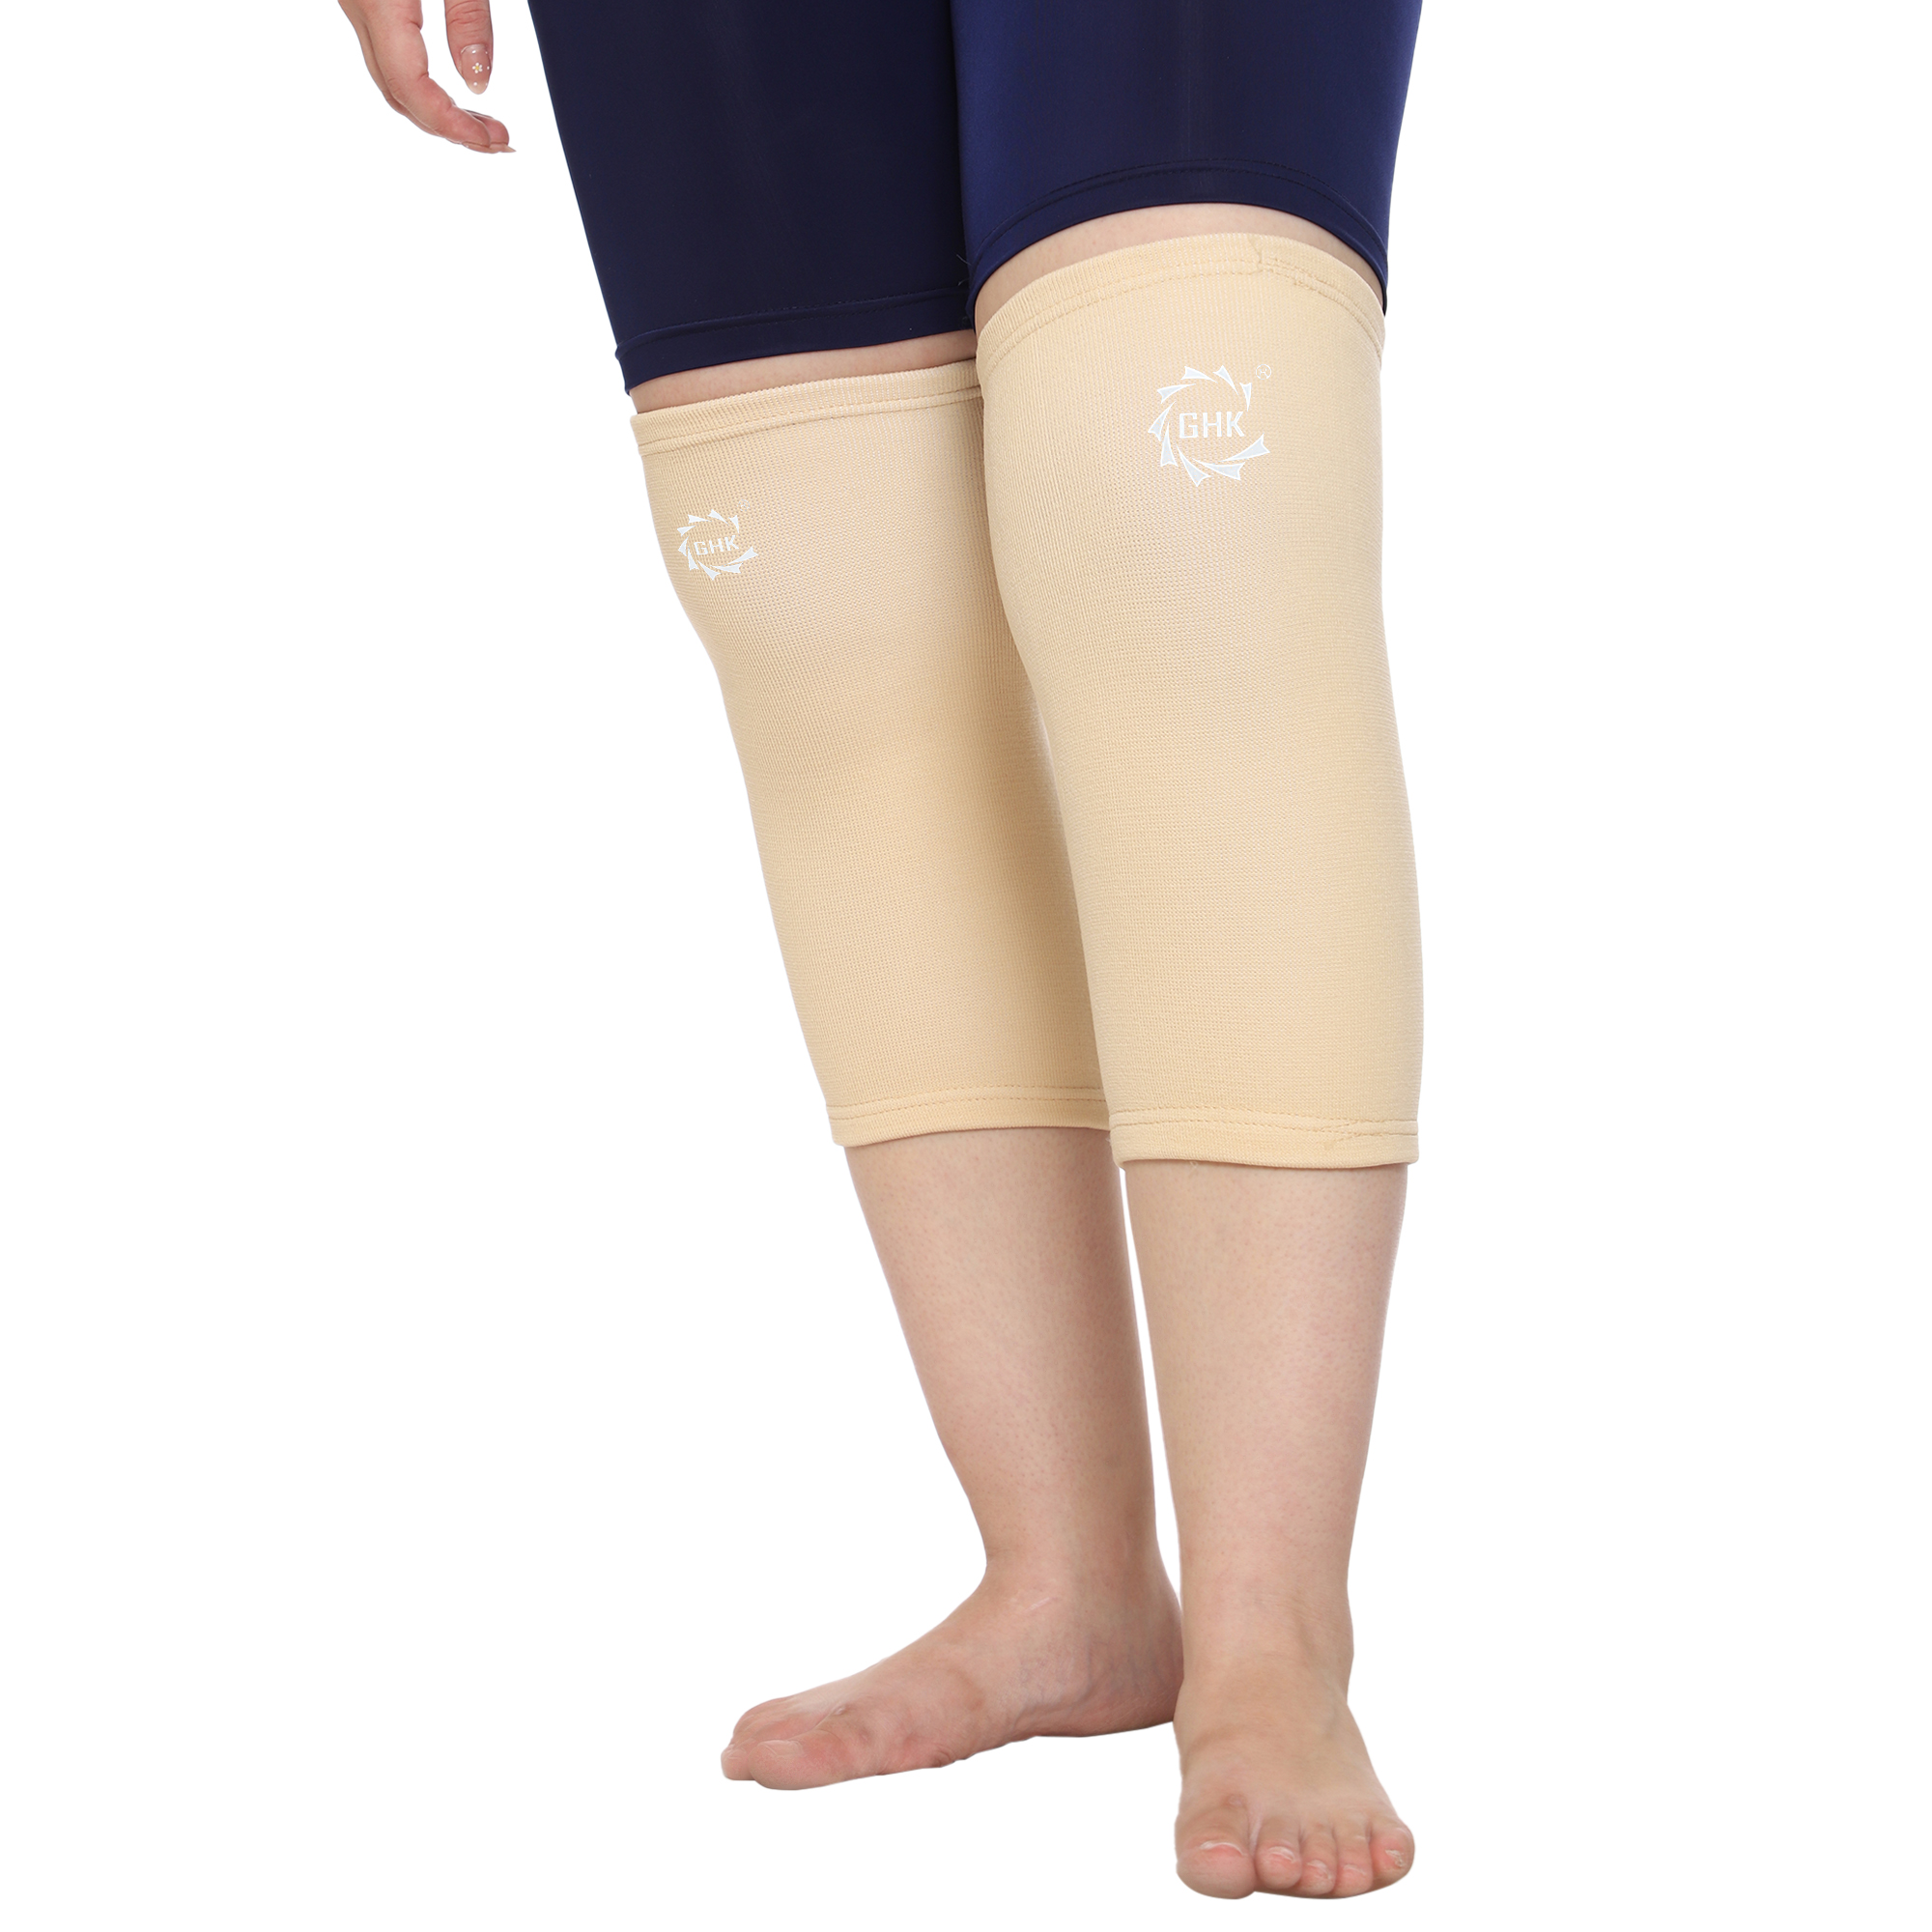 GHK S6 Compression Stocking Below Knee Support Pressure for